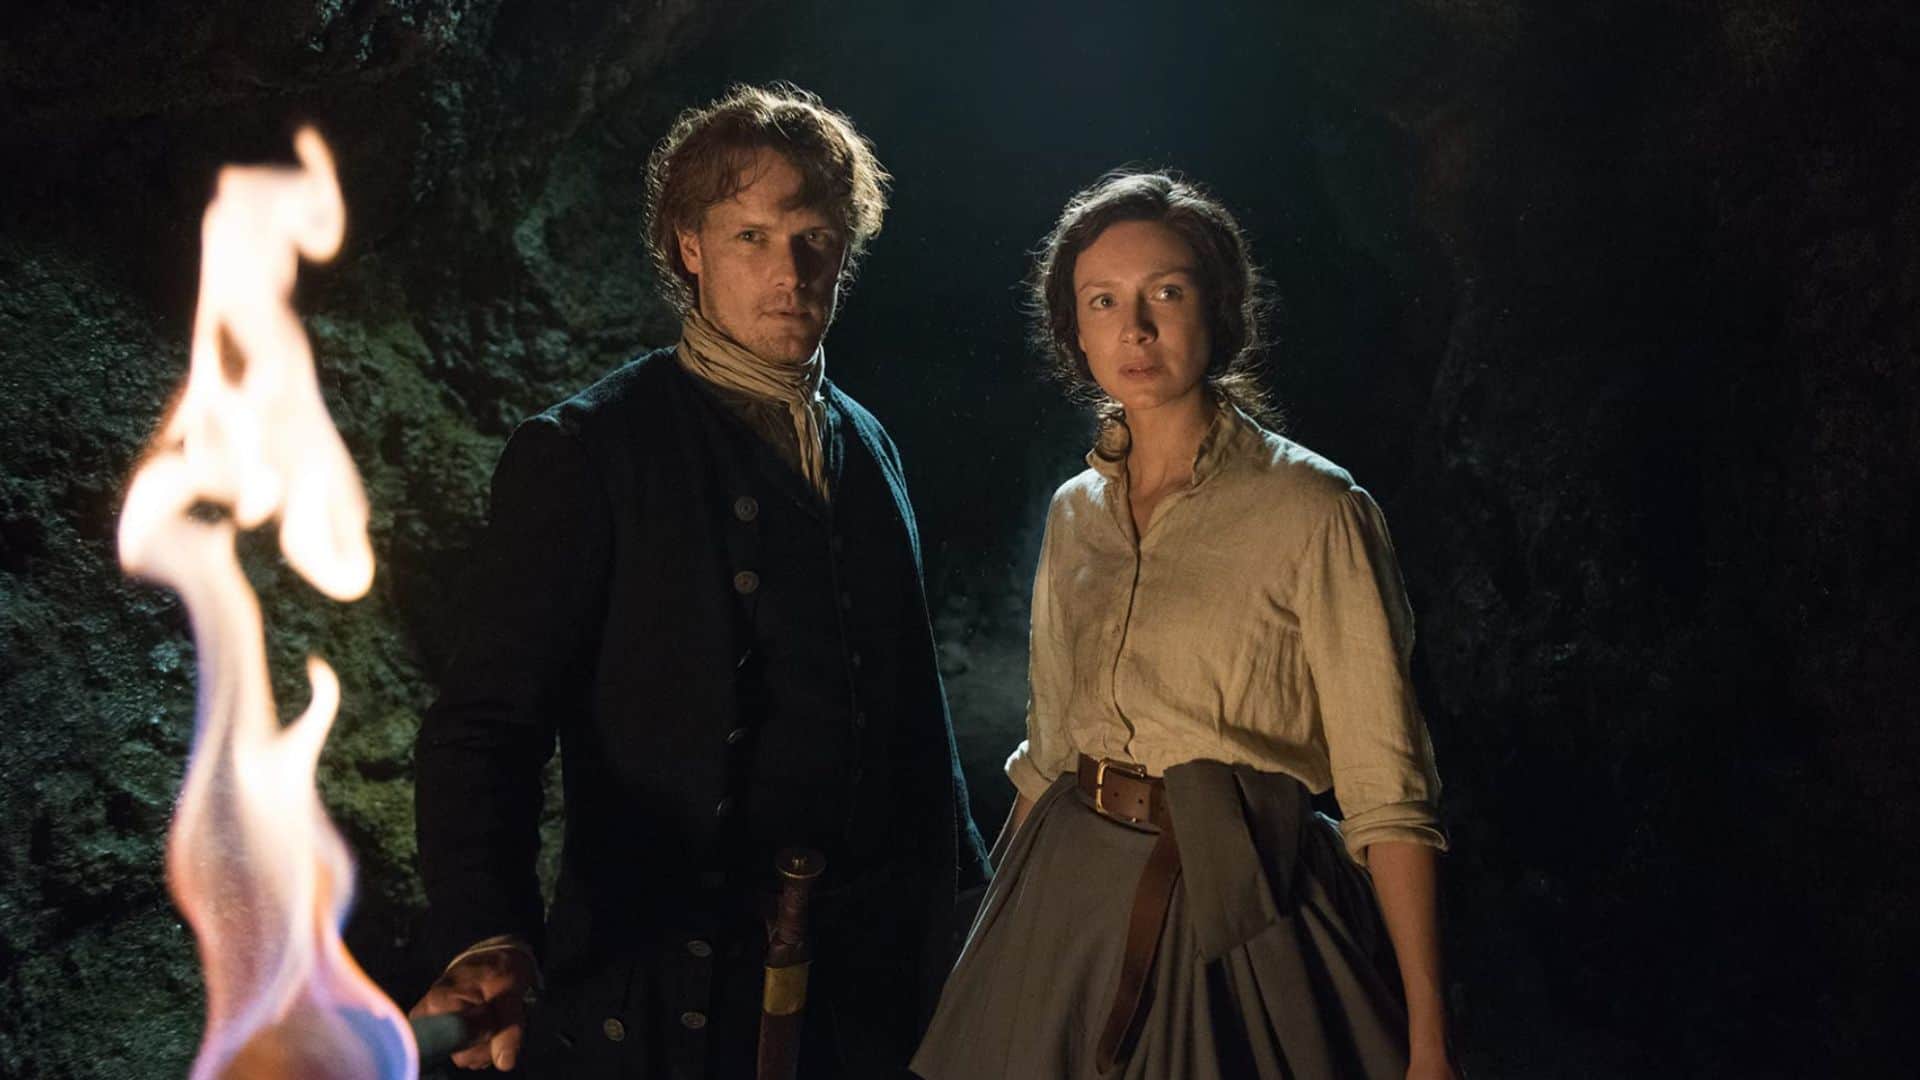 Jaime and Claire in 18th-century clothing next to a fire in this image from Netflix